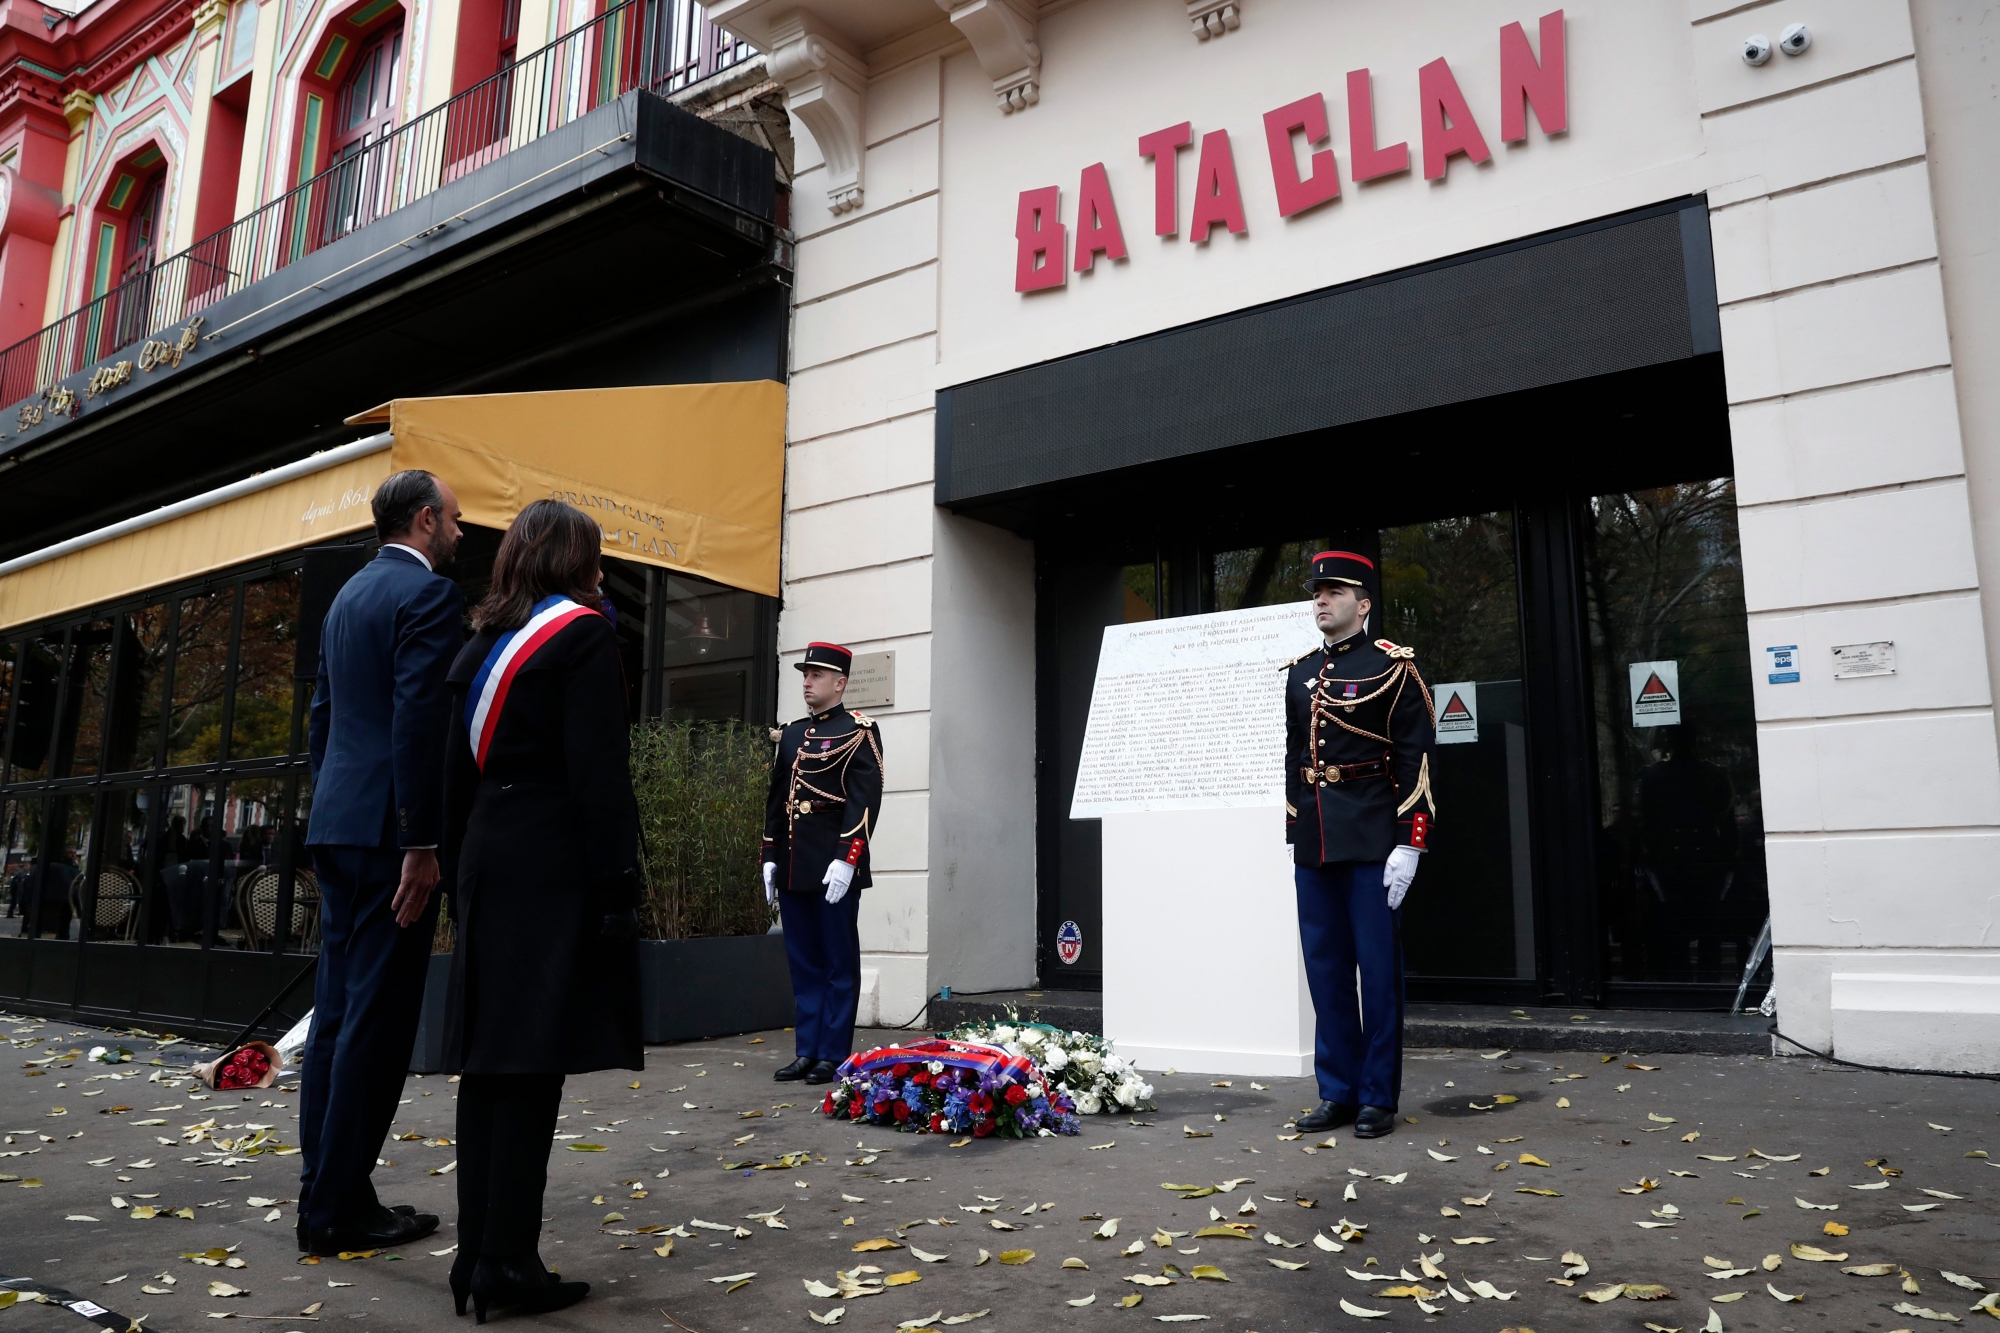 epa07162364 Paris Mayor Anne Hidalgo (R) and French Prime Minister Edouard Philippe (L) attend a ceremony in front a commemorative plaque at the entrance of the Bataclan concert venue to mark the third anniversary of the Paris attacks of November 2015 in which 130 people were killed, in Paris, France, 13 November 2018. The Paris terrorist attacks in November 2015 targeted the Bataclan concert hall as well as a series of bars and killed 130 people.  EPA/BENOIT TESSIER / POOL MAXPPP OUT FRANCE PARIS ATTACKS ANNIVERSARY